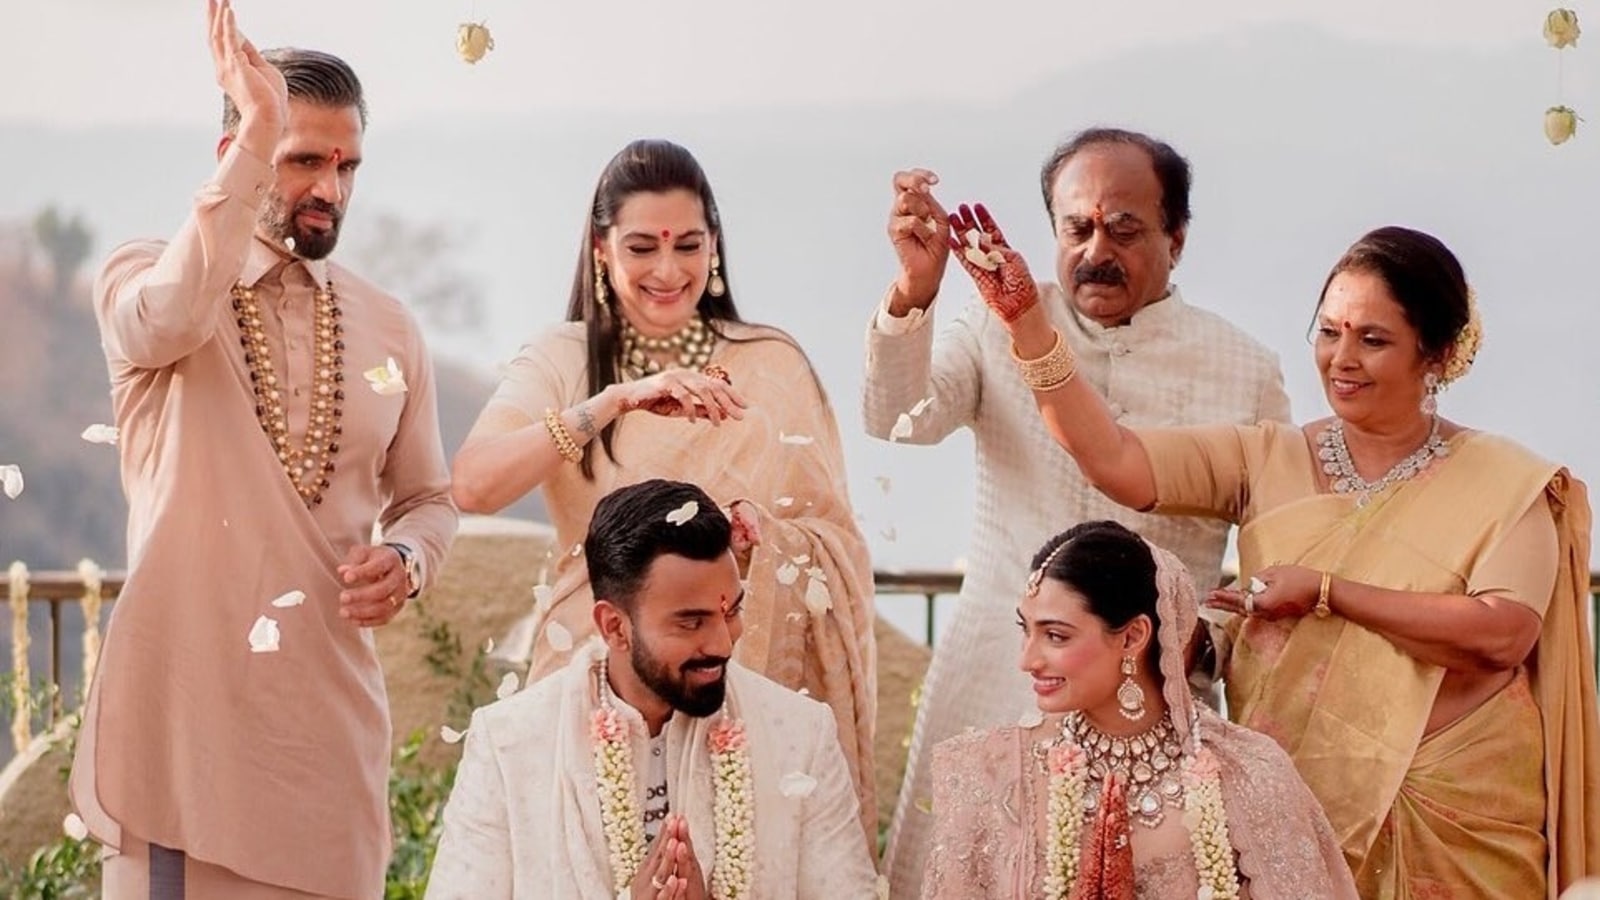 Suniel Shetty and wife Mana bless Athiya Shetty and KL Rahul, hug daughter in new pics from wedding ceremony